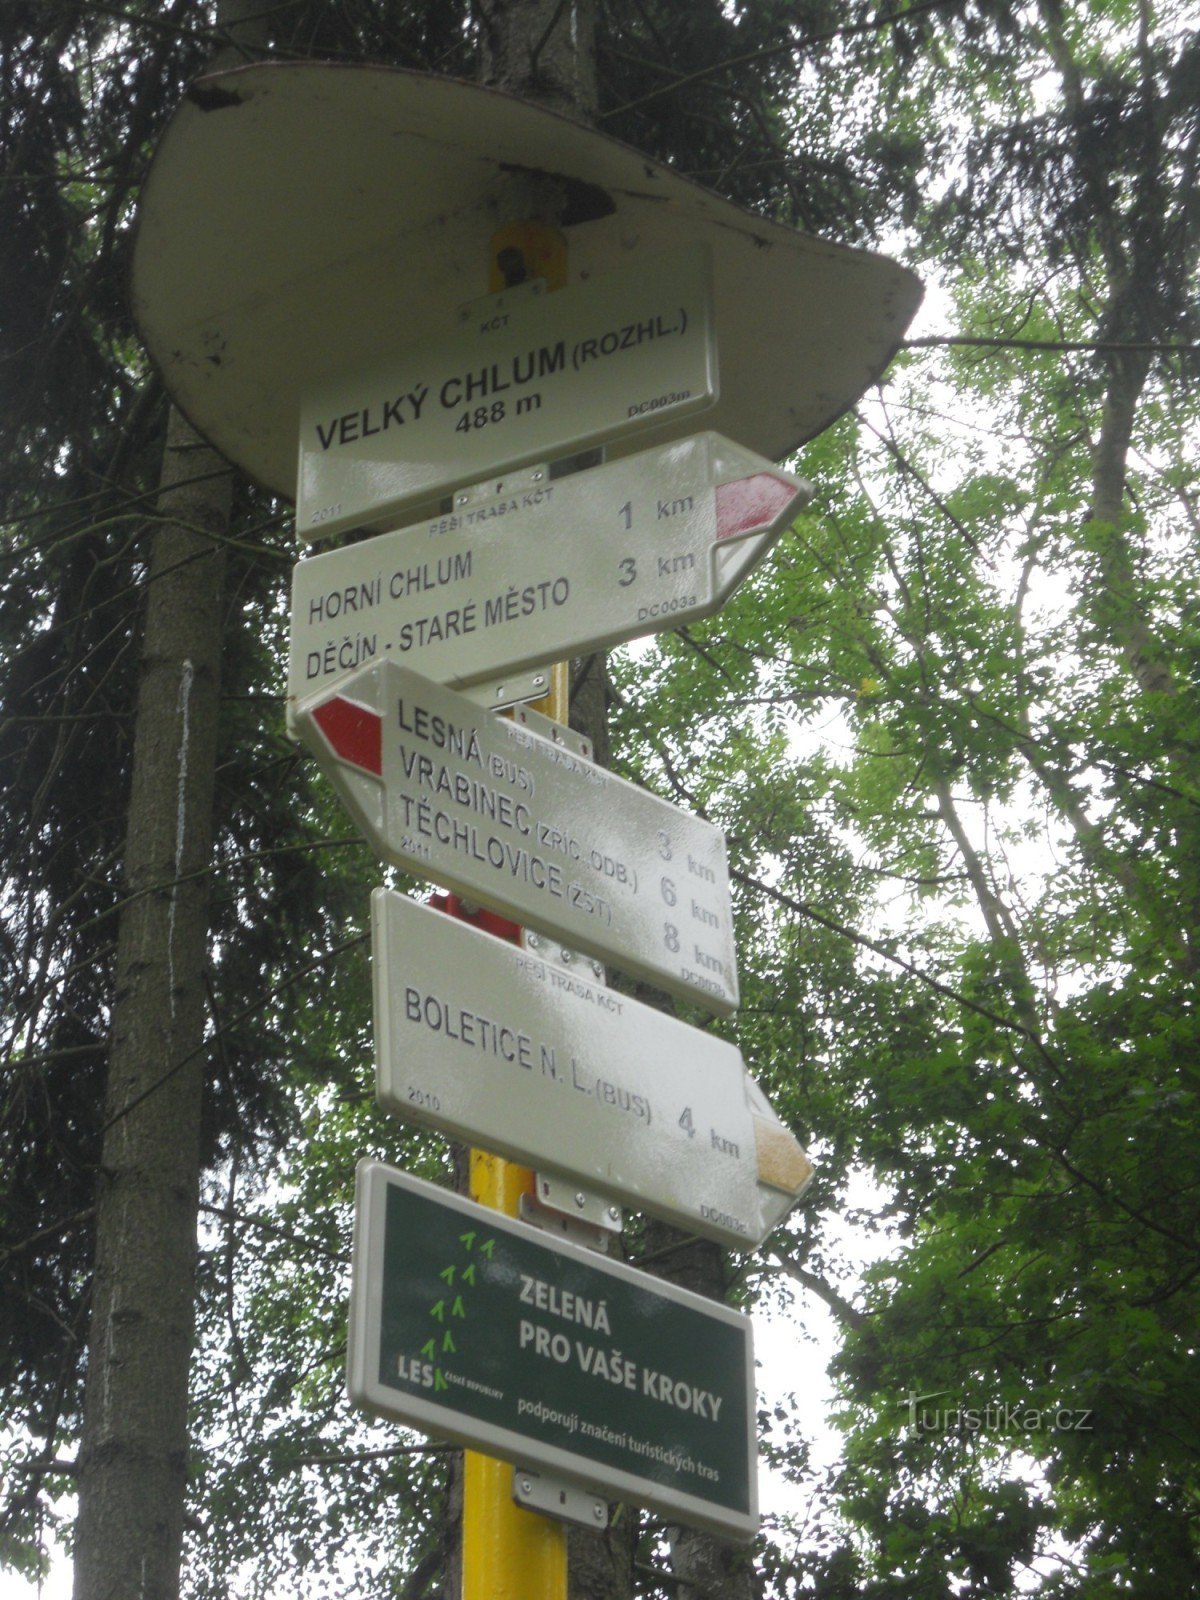 KČT signpost at the lookout tower.